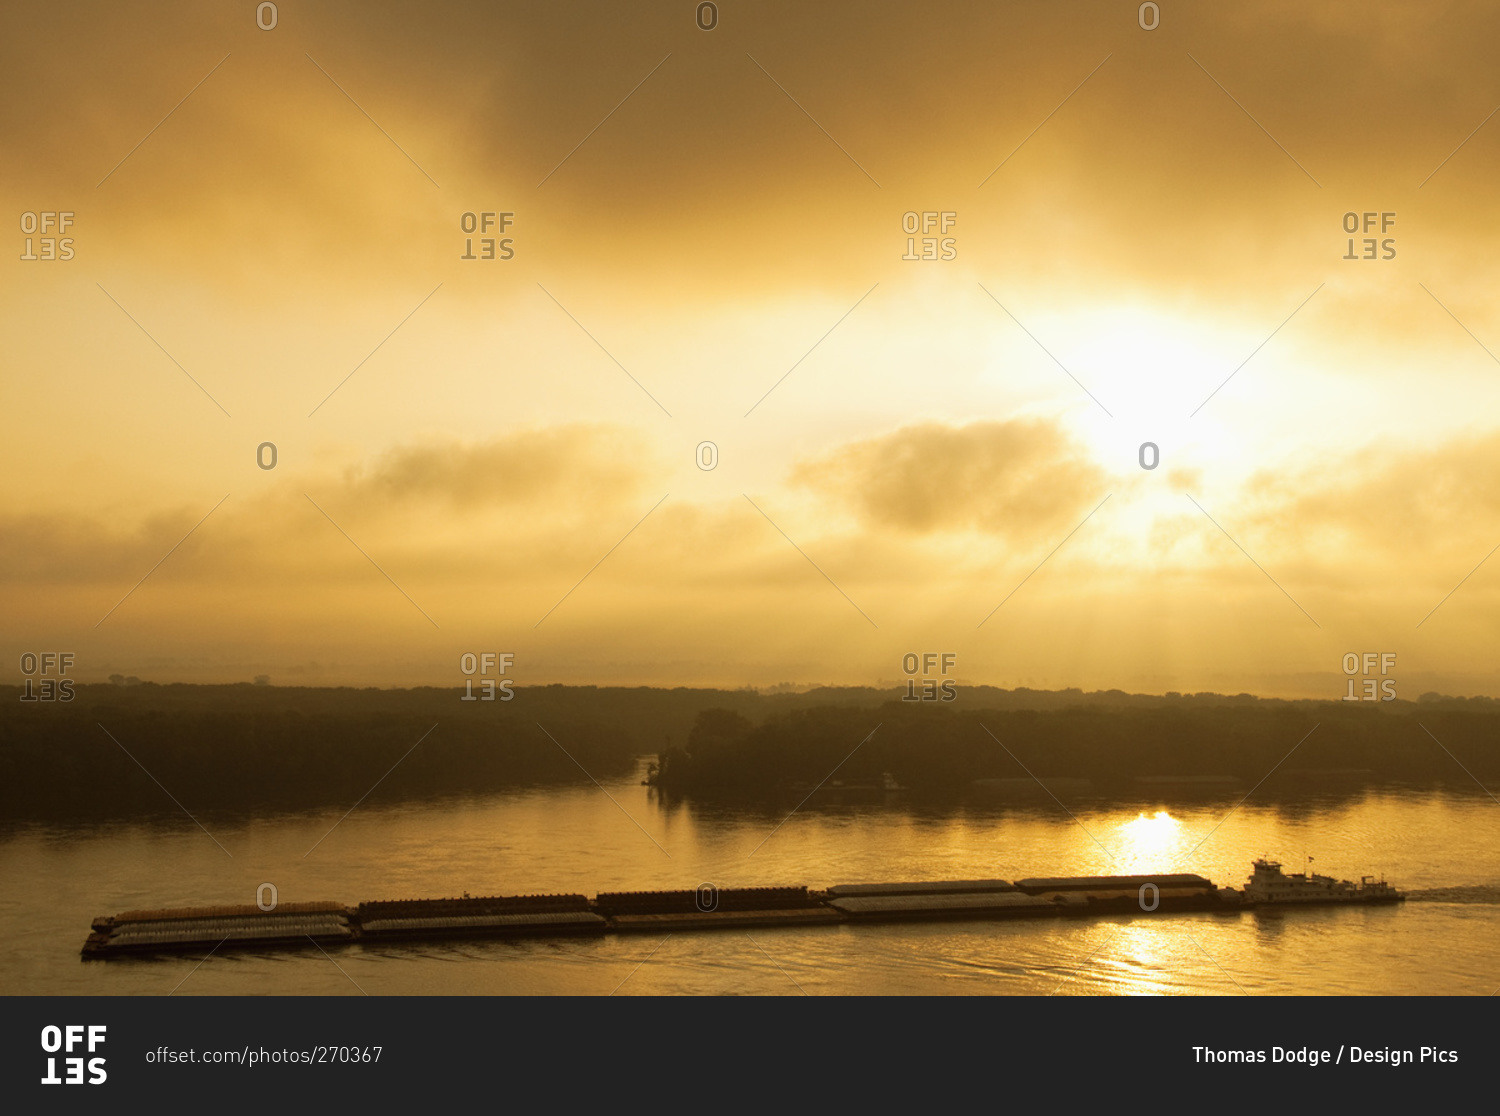 Grain barge navigating the Mississippi River in early morning light, near Hannibal, Missouri, USA